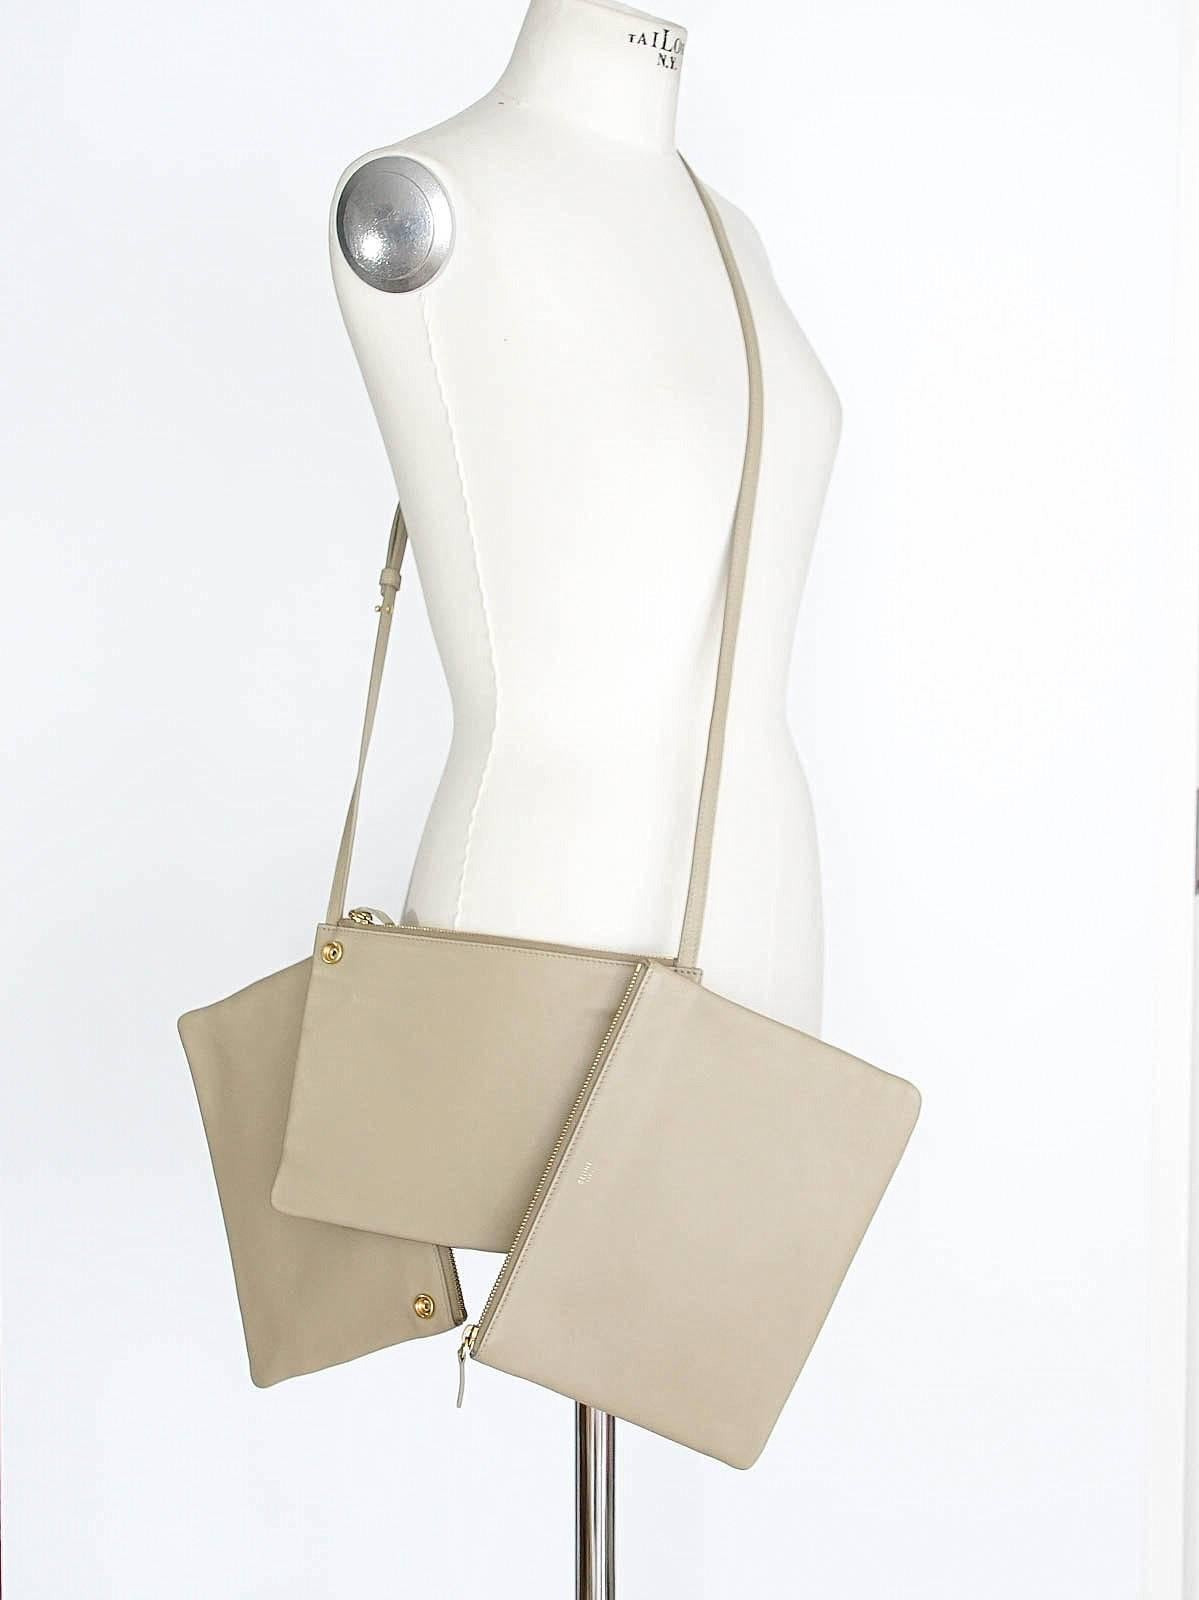 Guaranteed authentic CELINE Trio leather bag in neutral Sand.
Versatile with 3 zipper pouches 2 of which are detachable.
Adjustable strap allows bag to be carried as crossbody or shoulder.
Interior is lined in grey fabric.
CELINE PARIS stamp in gold